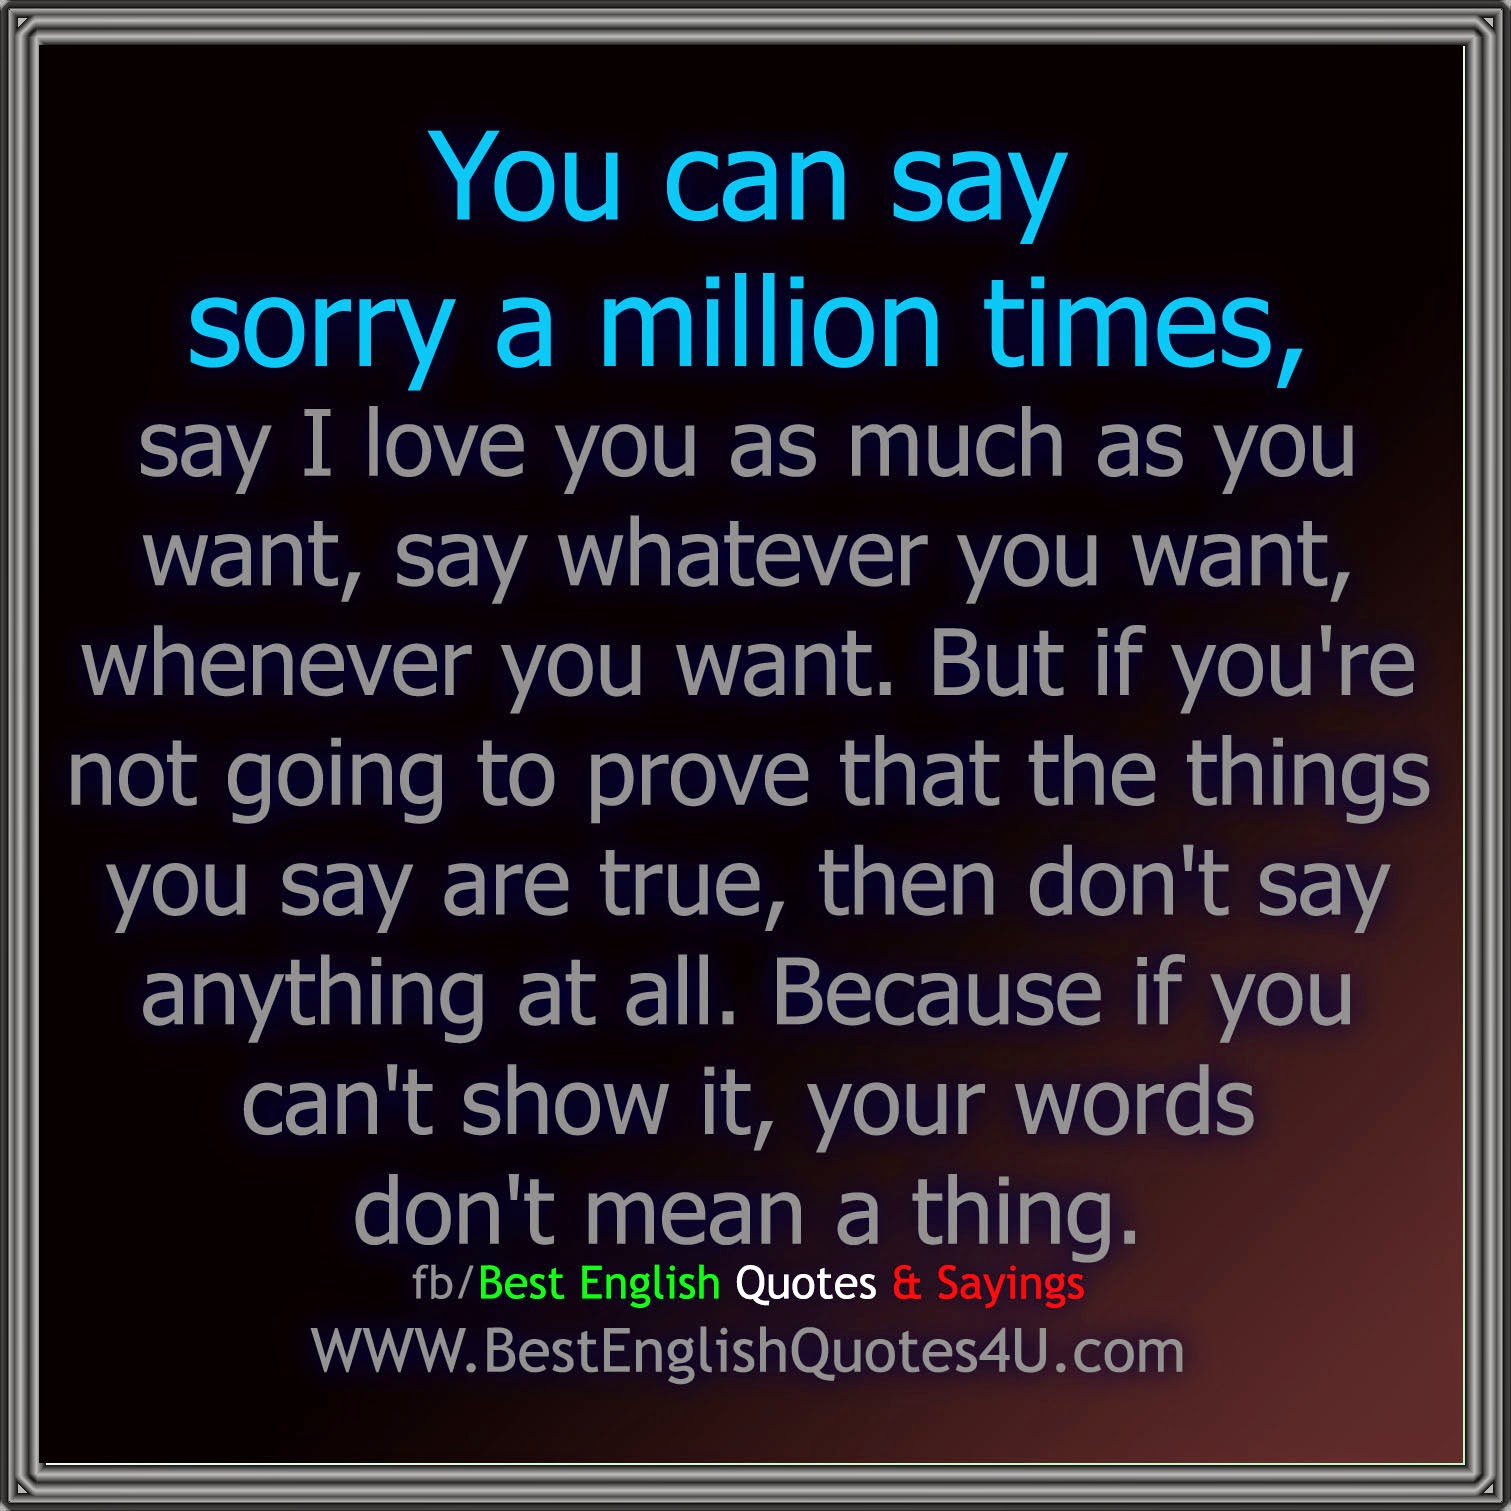 Words to say sorry and i love you